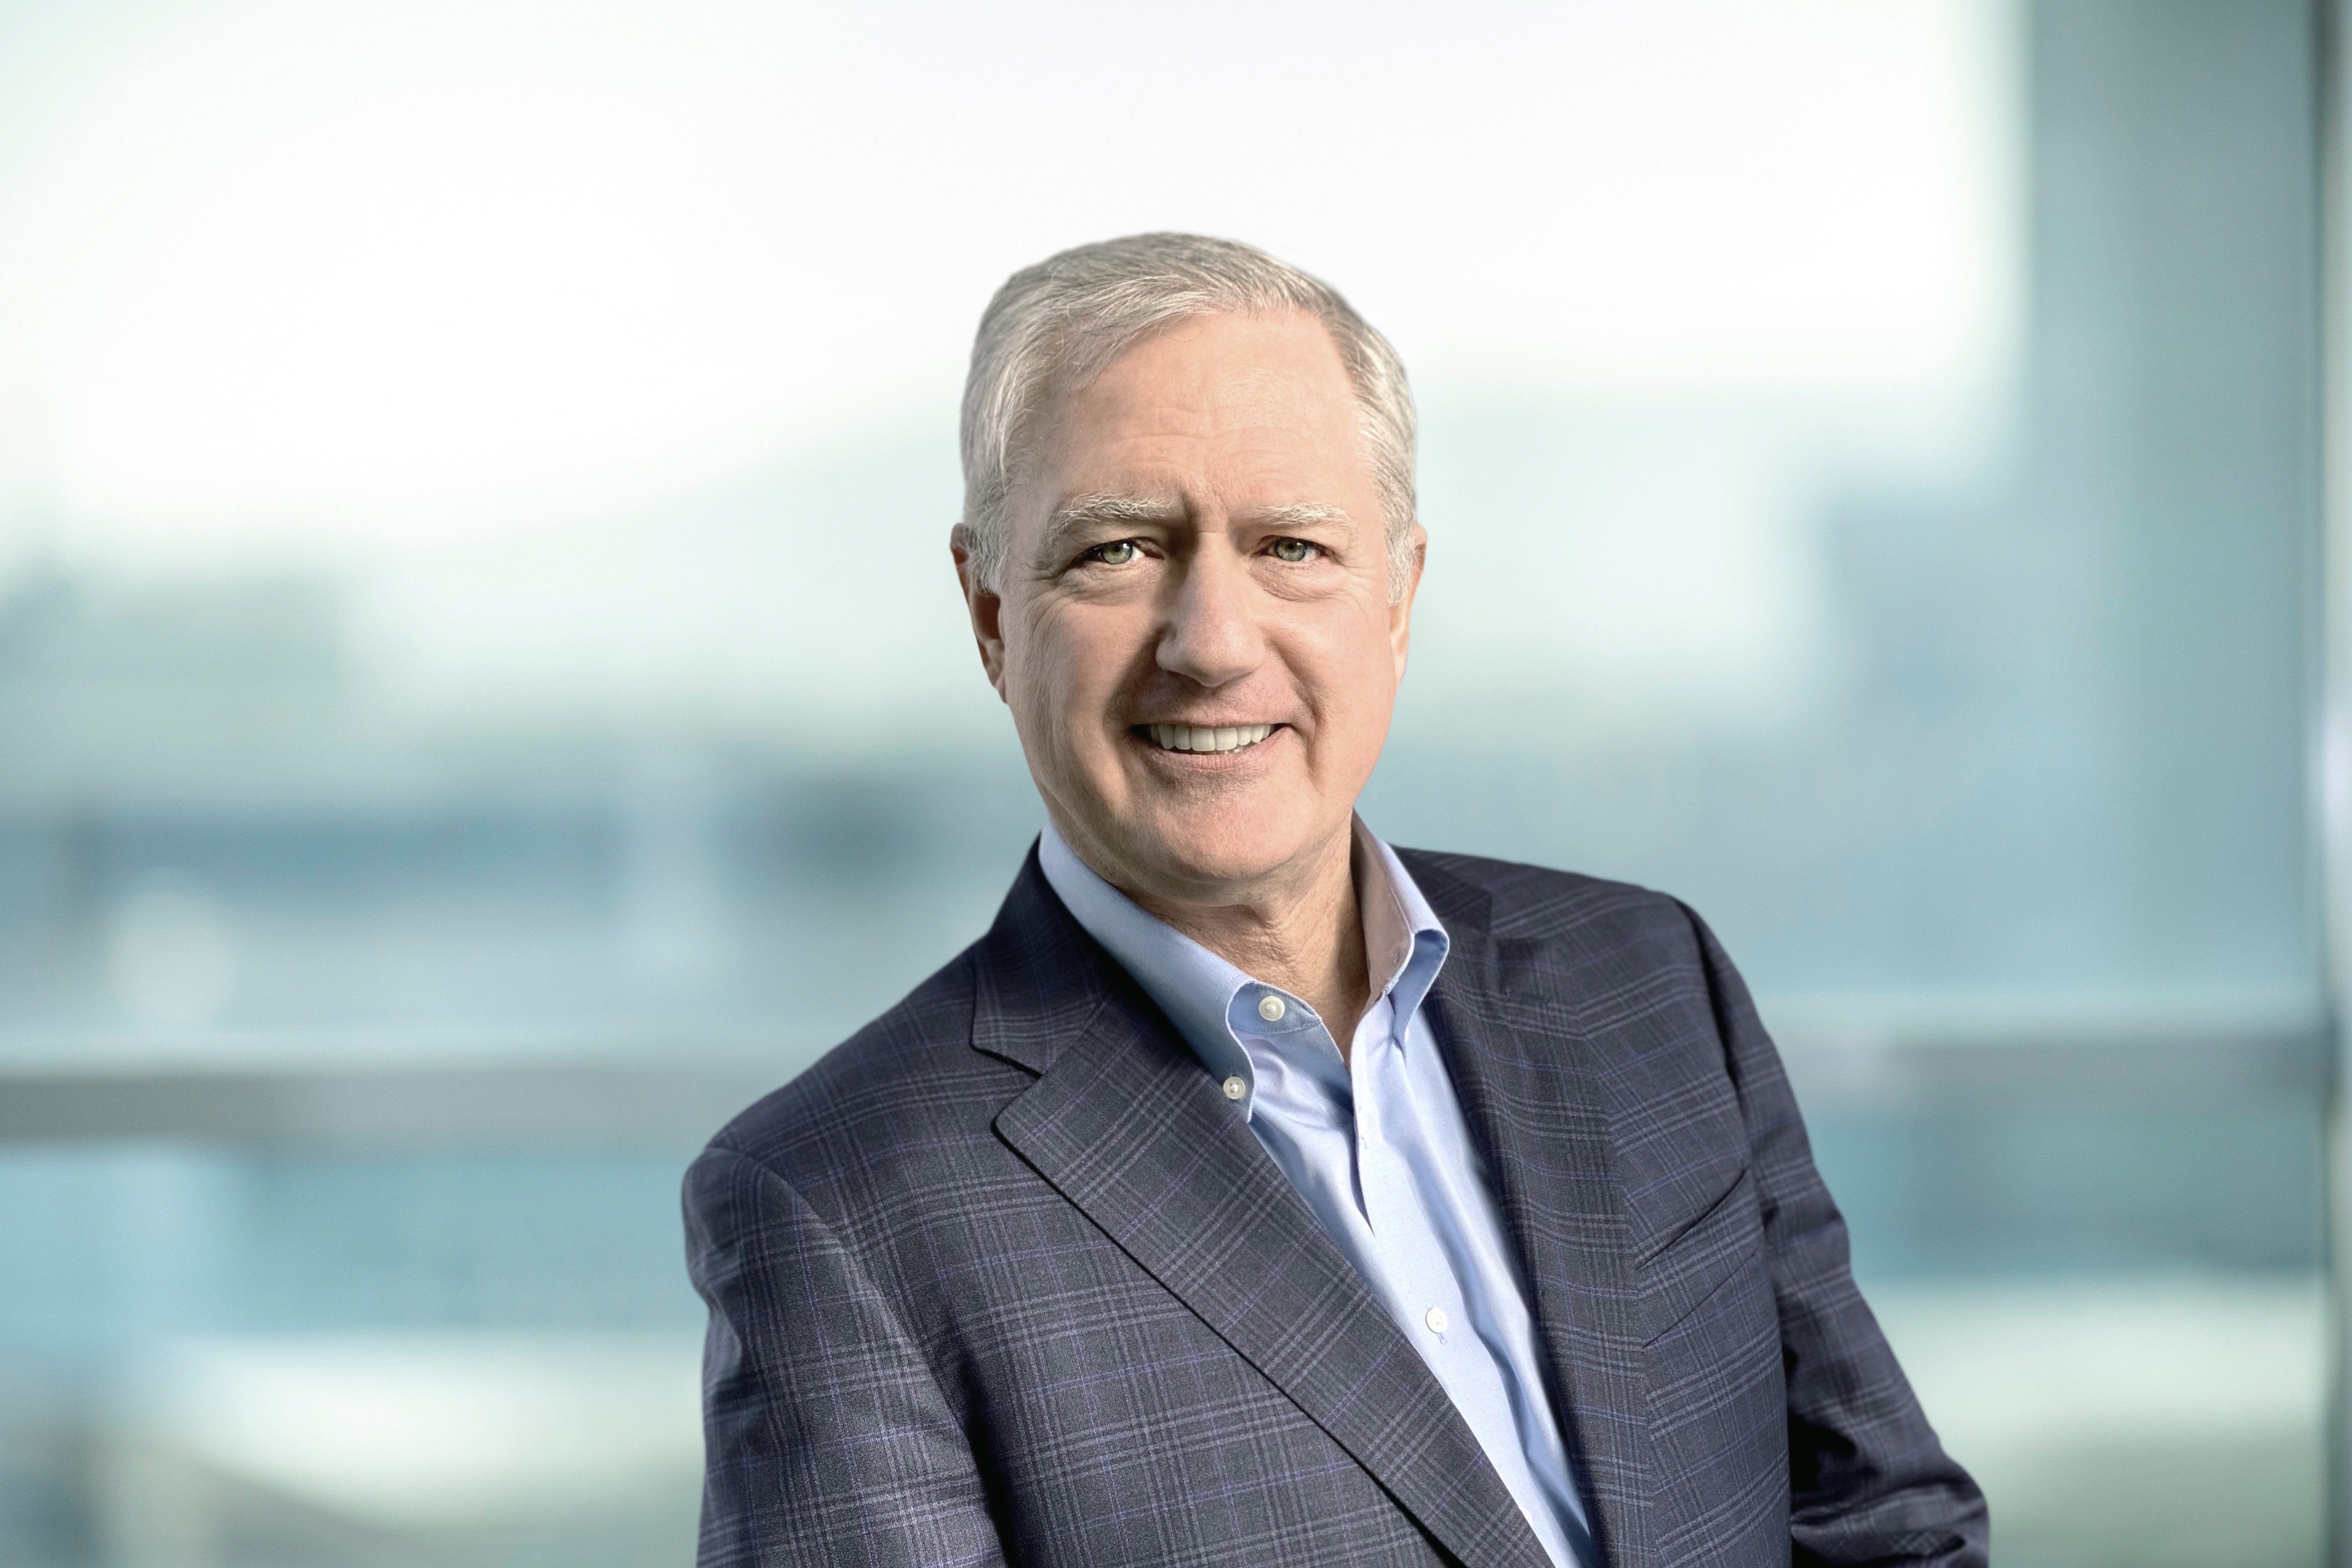 John O’Leary, President and CEO of Daimler Truck North America